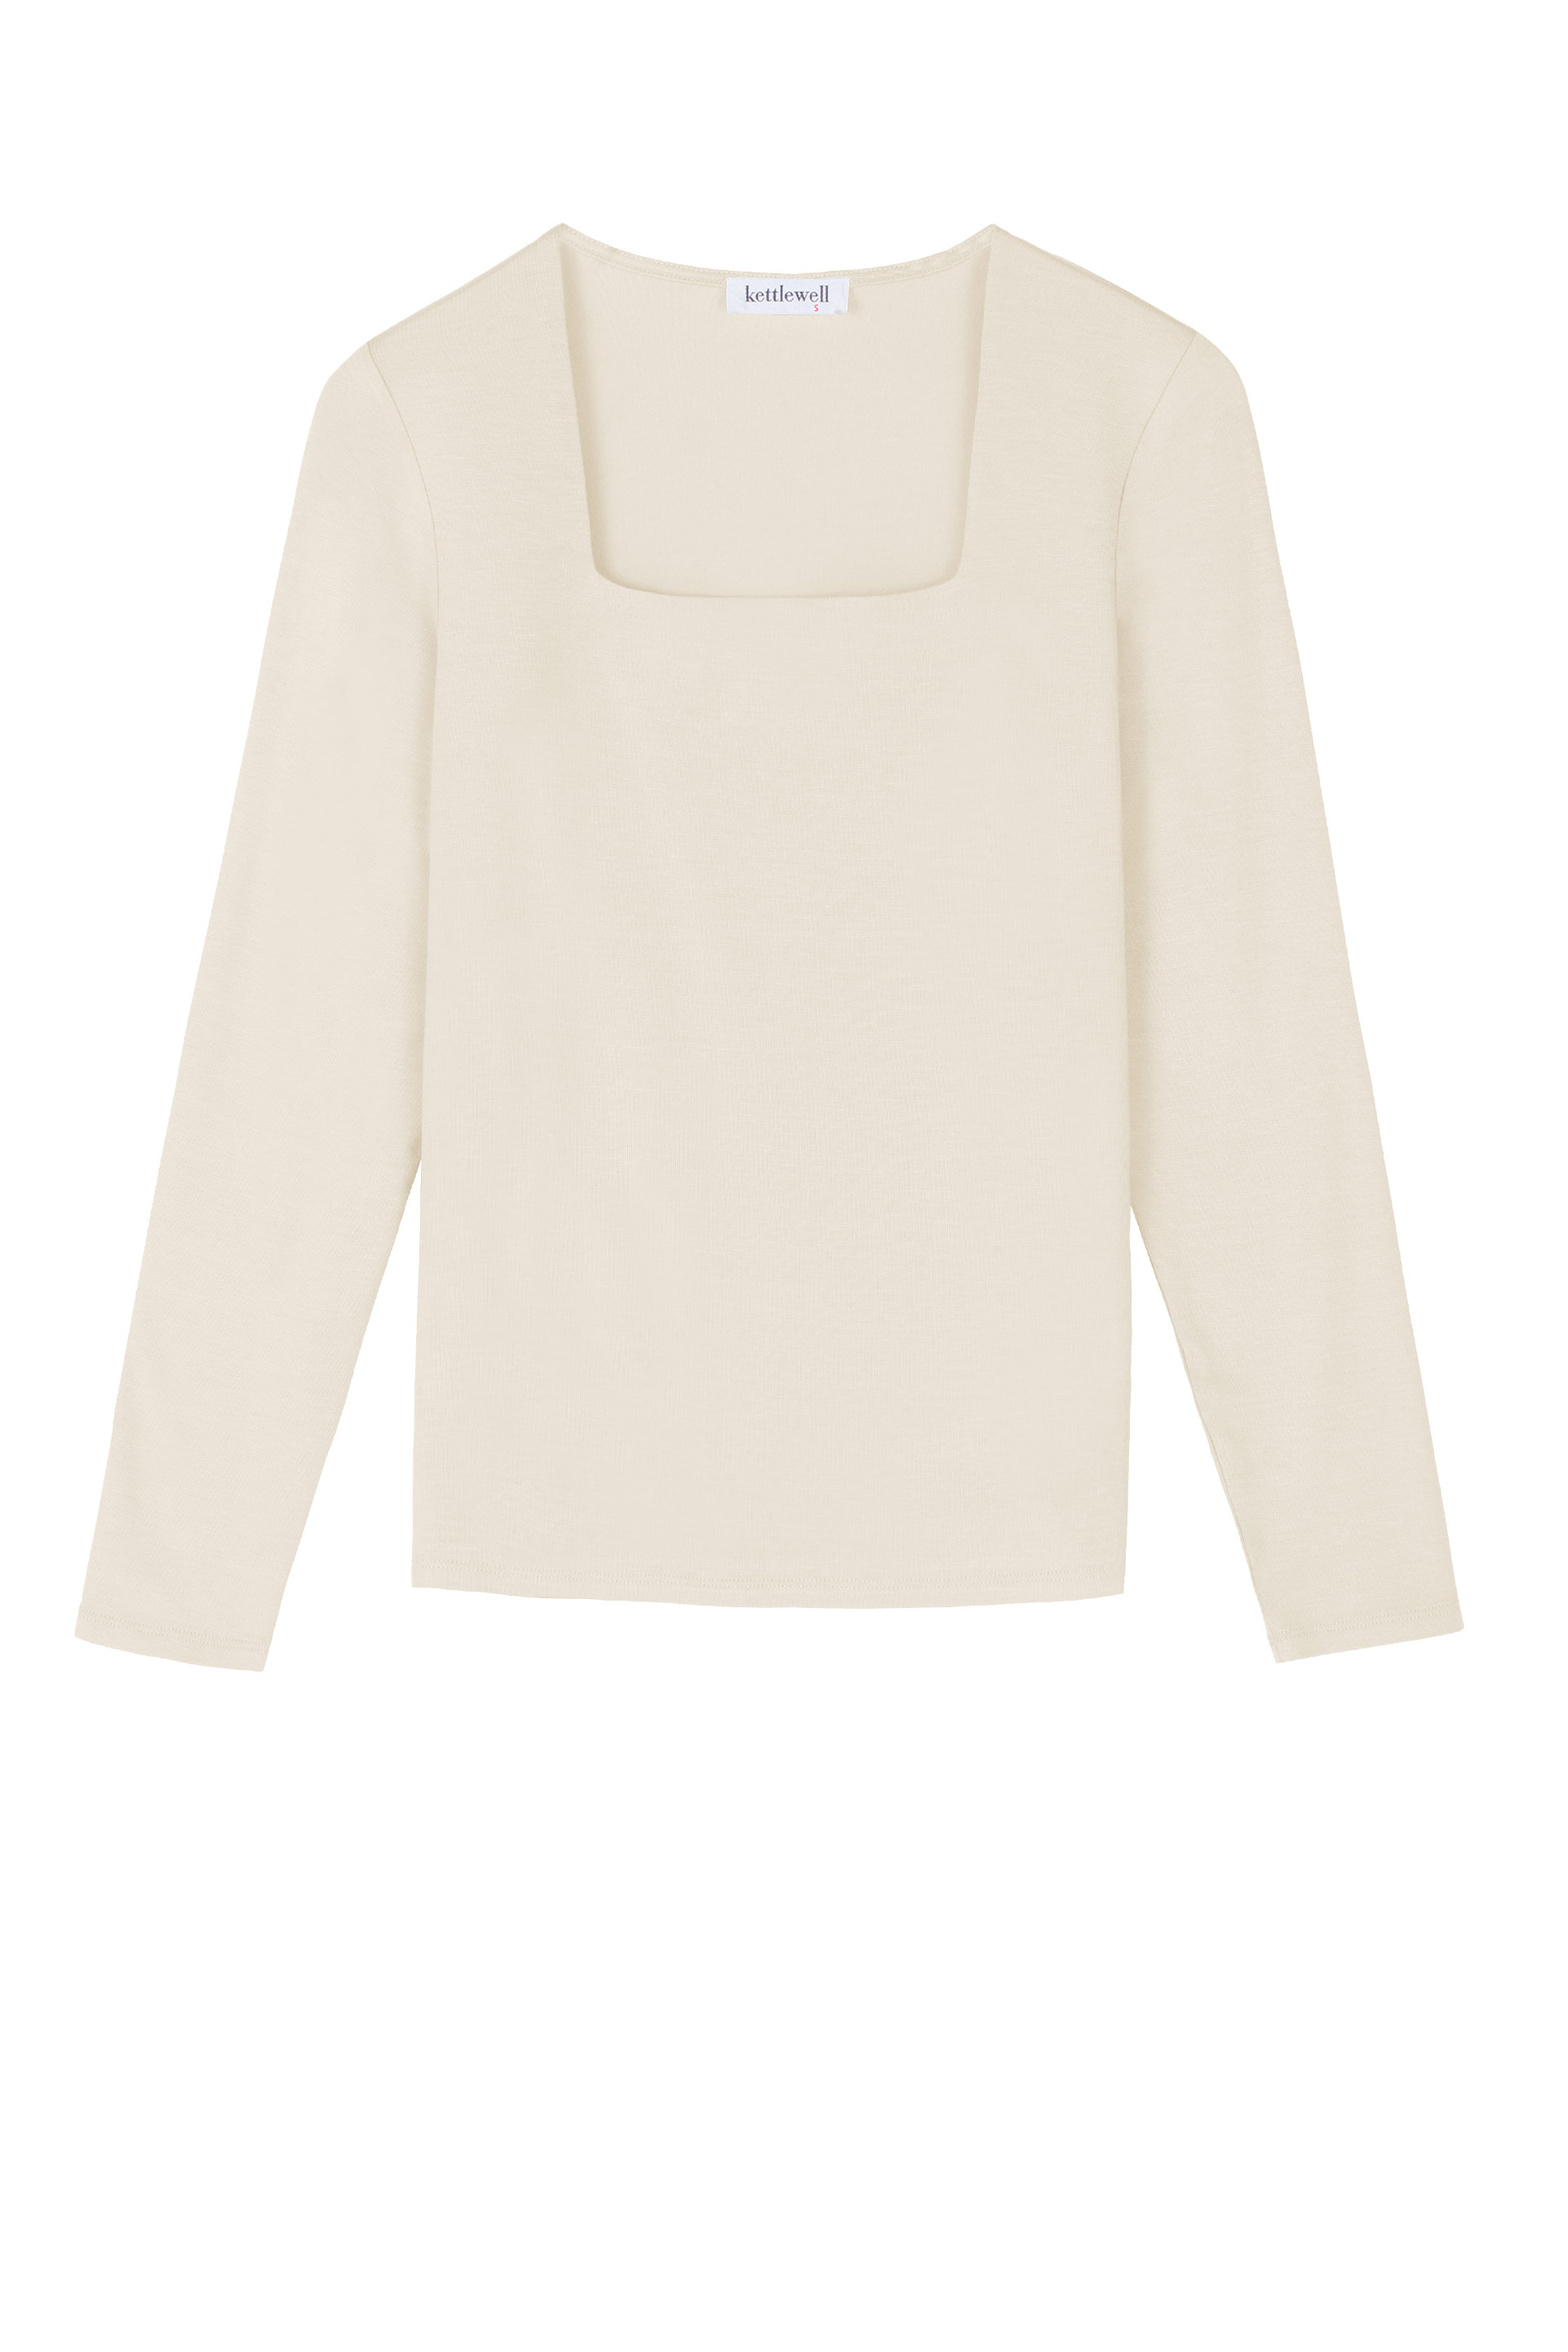 Cotton Square Neck Long Sleeve Top in White